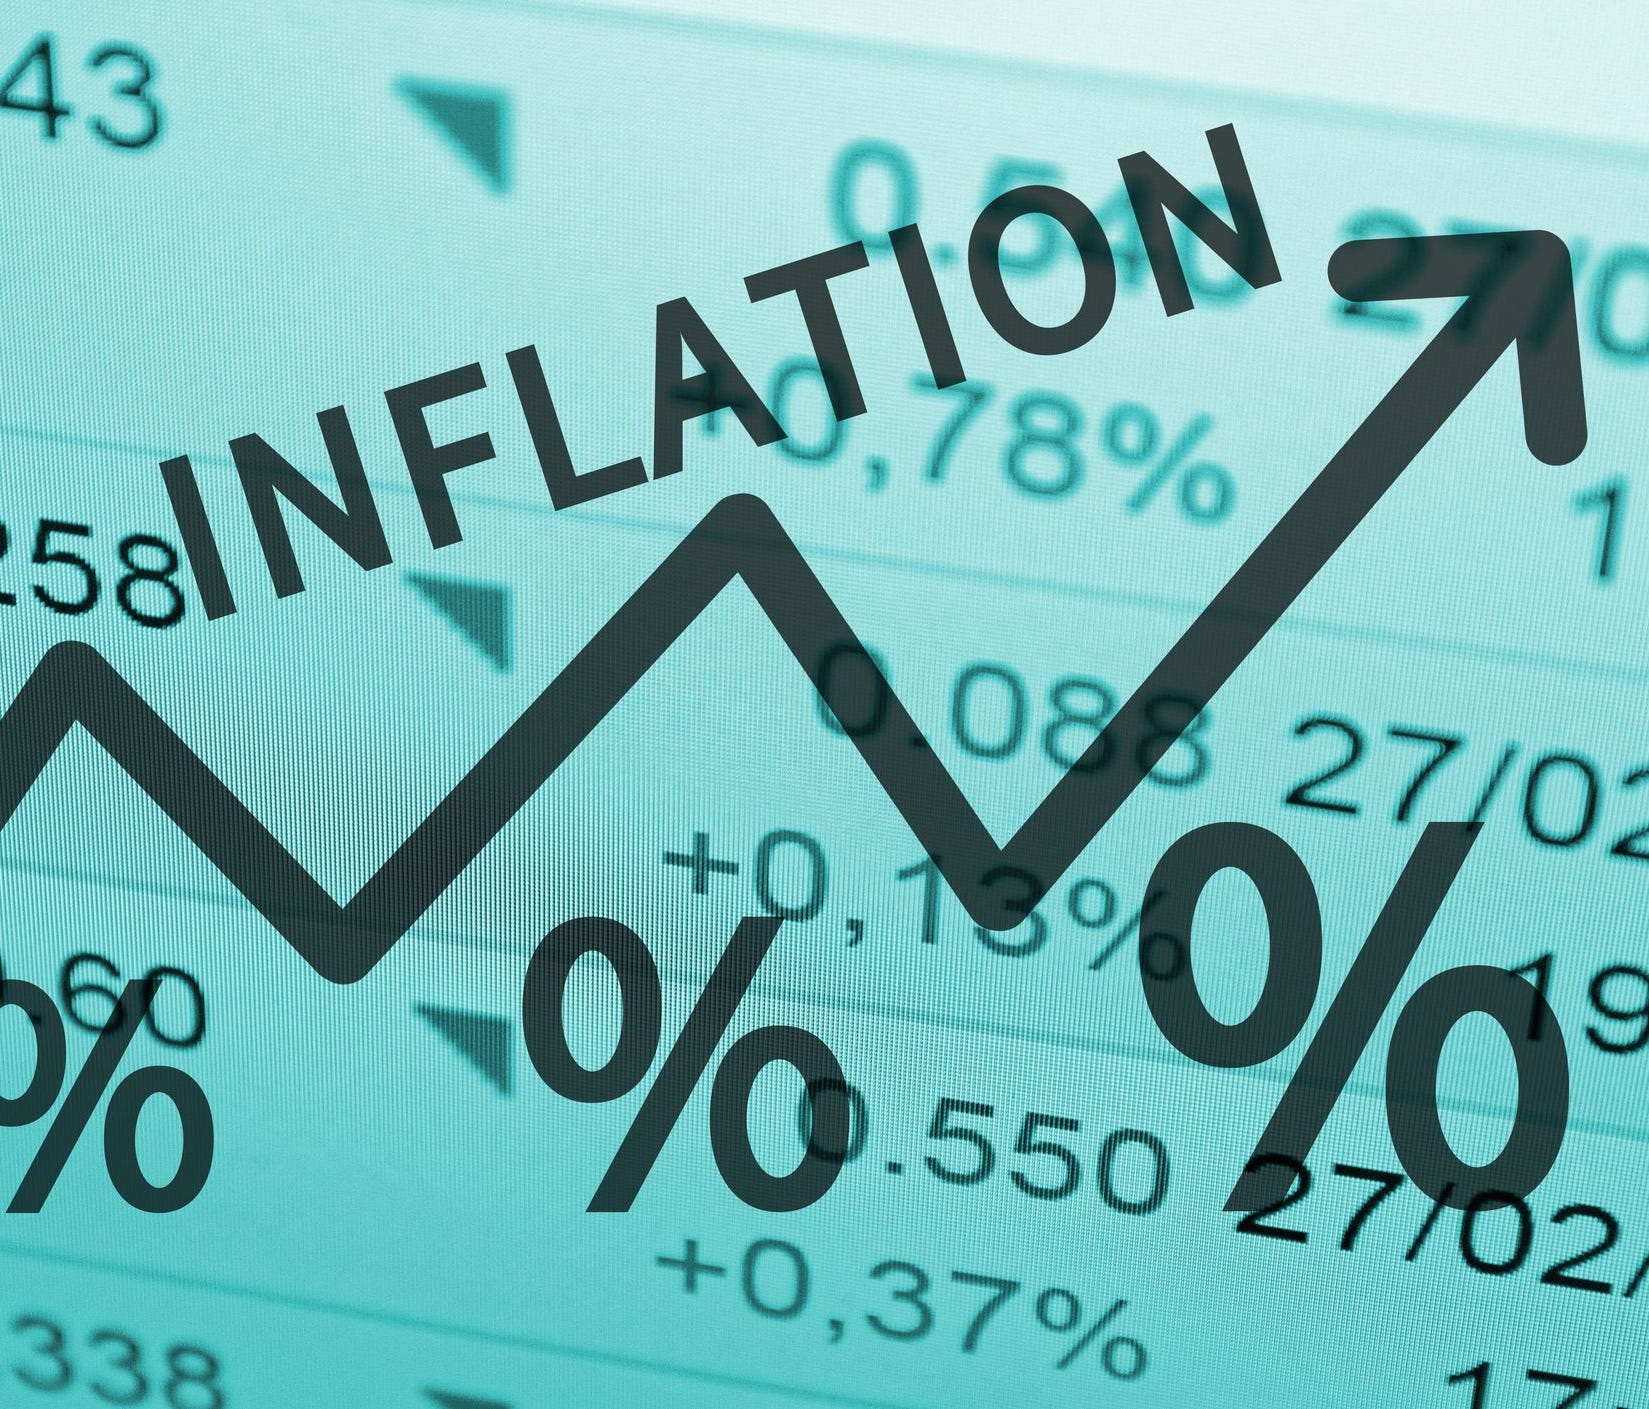 If you believe the economy will soon grow faster and that inflation will accelerate, then you might want to consider investing a not insignificant portion of your portfolio in Treasury Inflation-Protected Securities or TIPS.